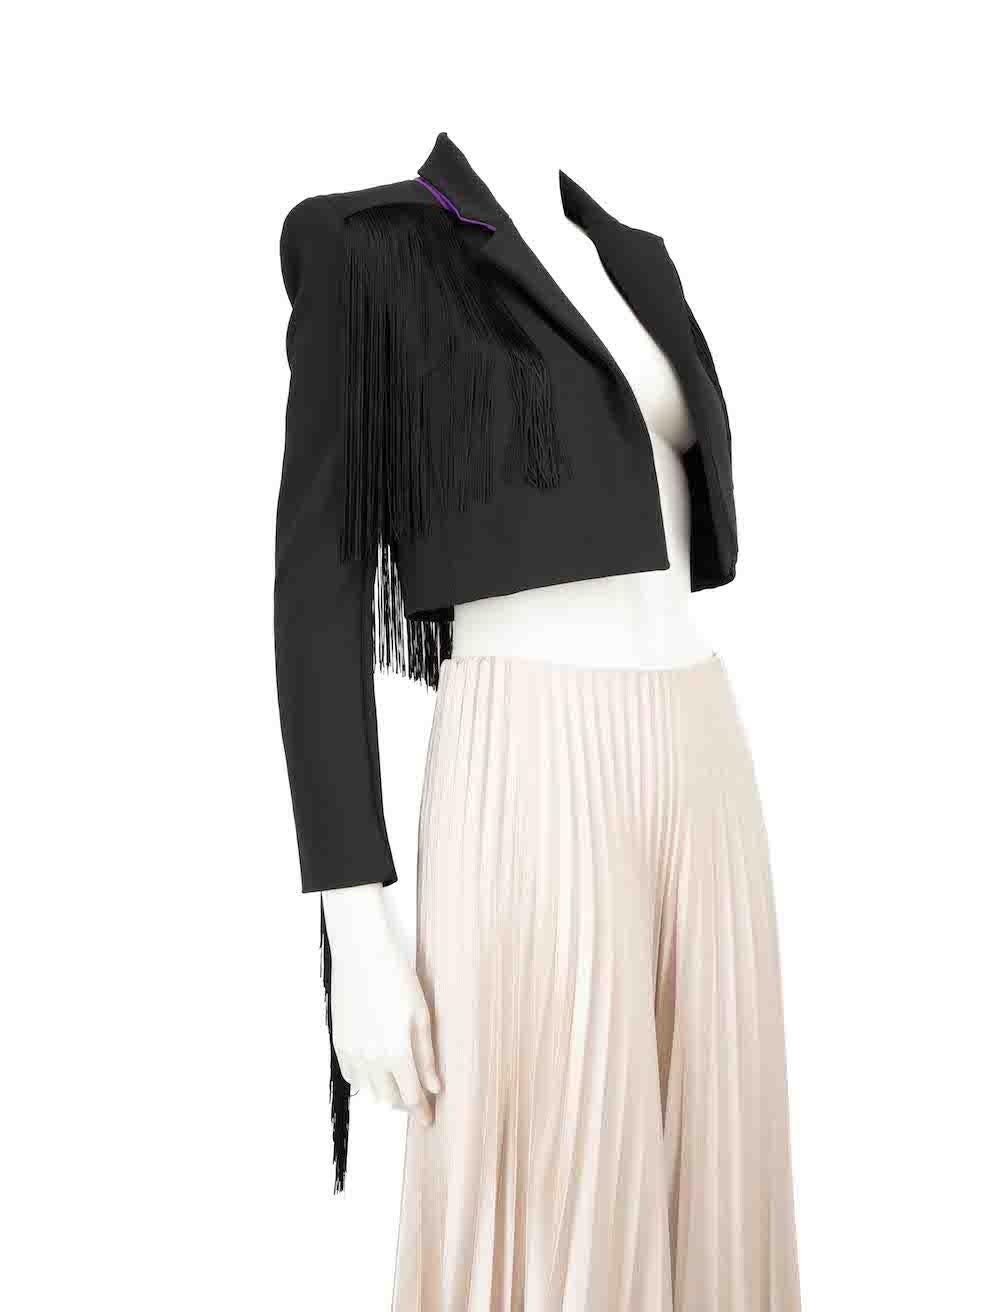 CONDITION is Very good. Minimal wear to the blazer is evident. Minimal marks on the left sleeve on this used Pinko designer resale item.
 
 
 
 Details
 
 
 Black
 
 Polyester
 
 Blazer
 
 Tassel trim
 
 Long sleeves
 
 Shoulder pads
 
 Cropped fit
